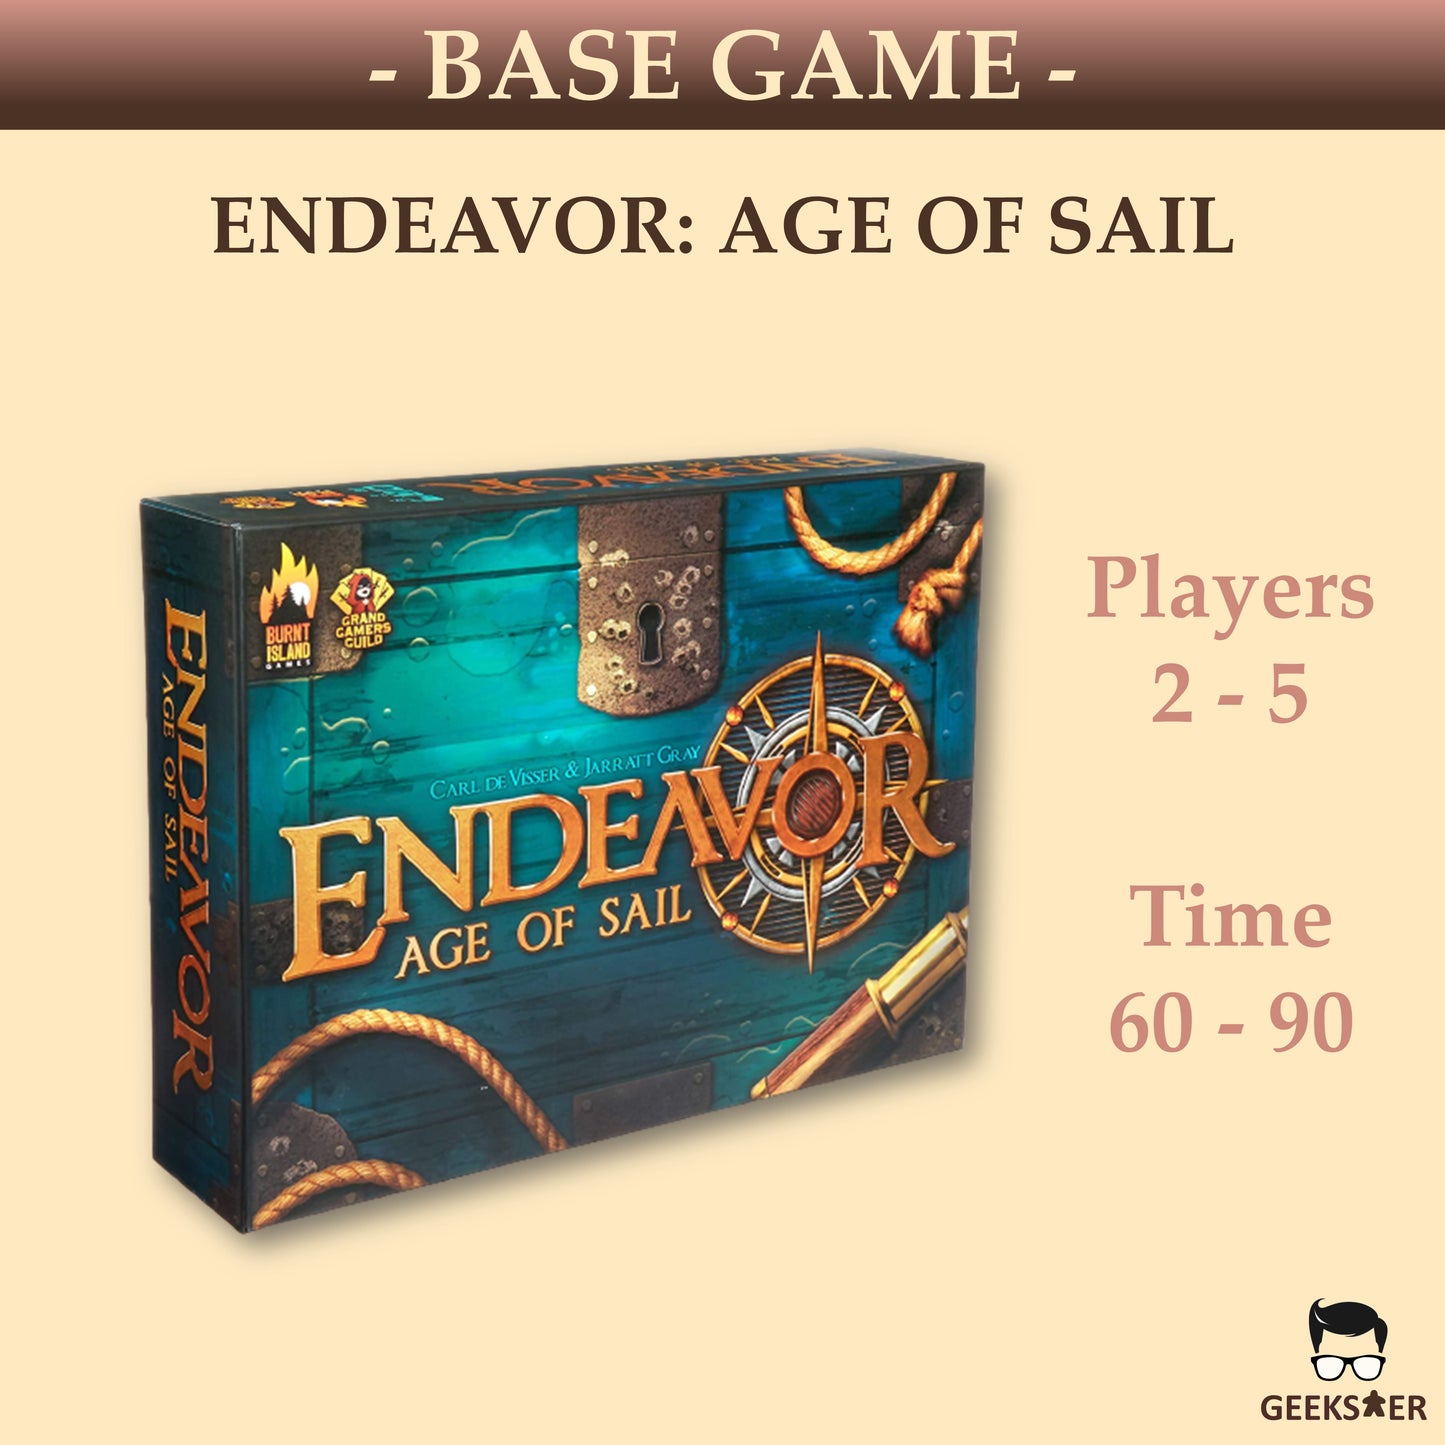 Endeavor: Age of Sail